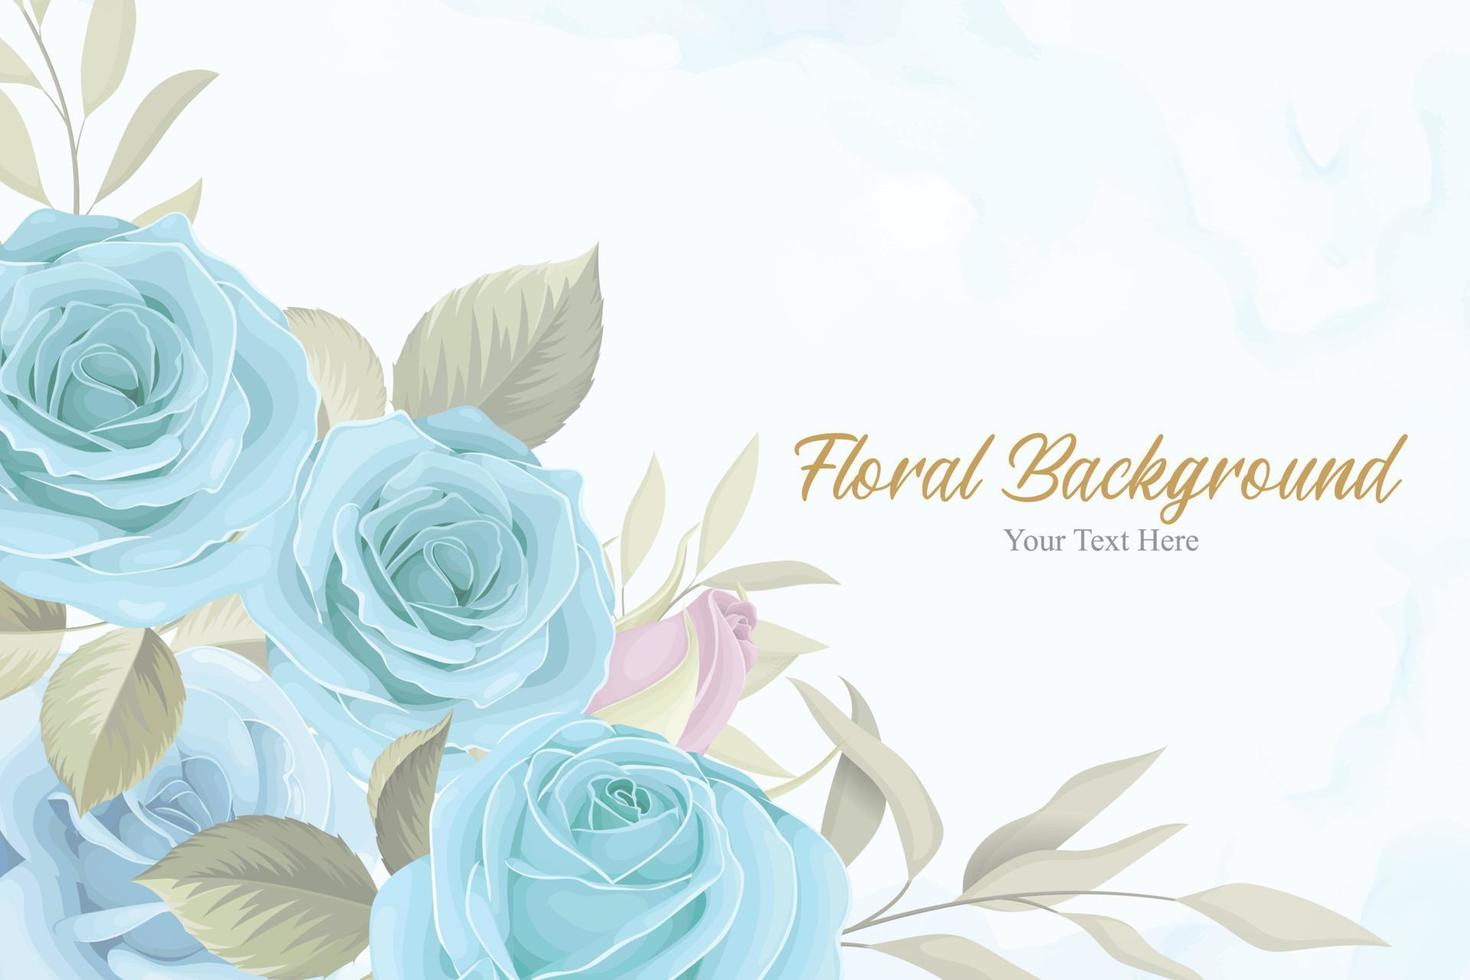 Beautiful floral background with blue flowers vector